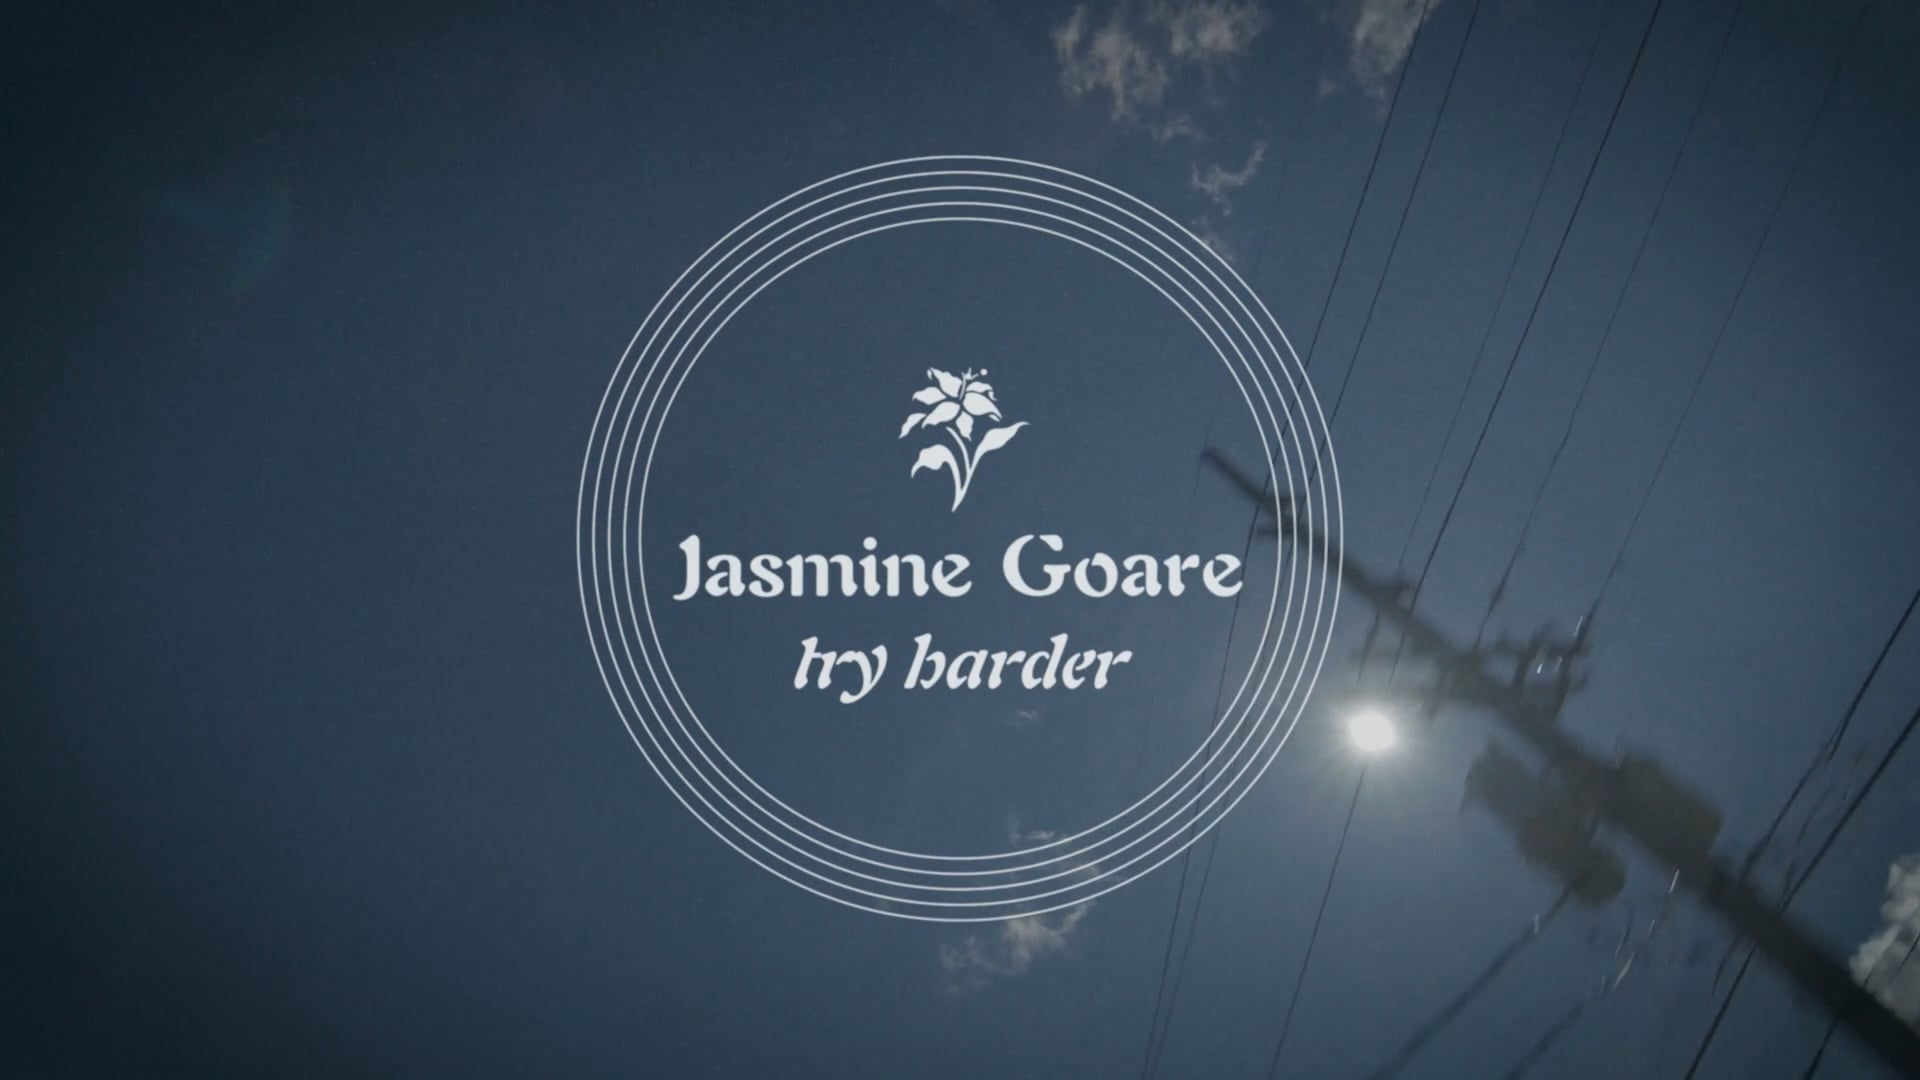 Jasmine Gore - "Try Harder" (Official Music Video)